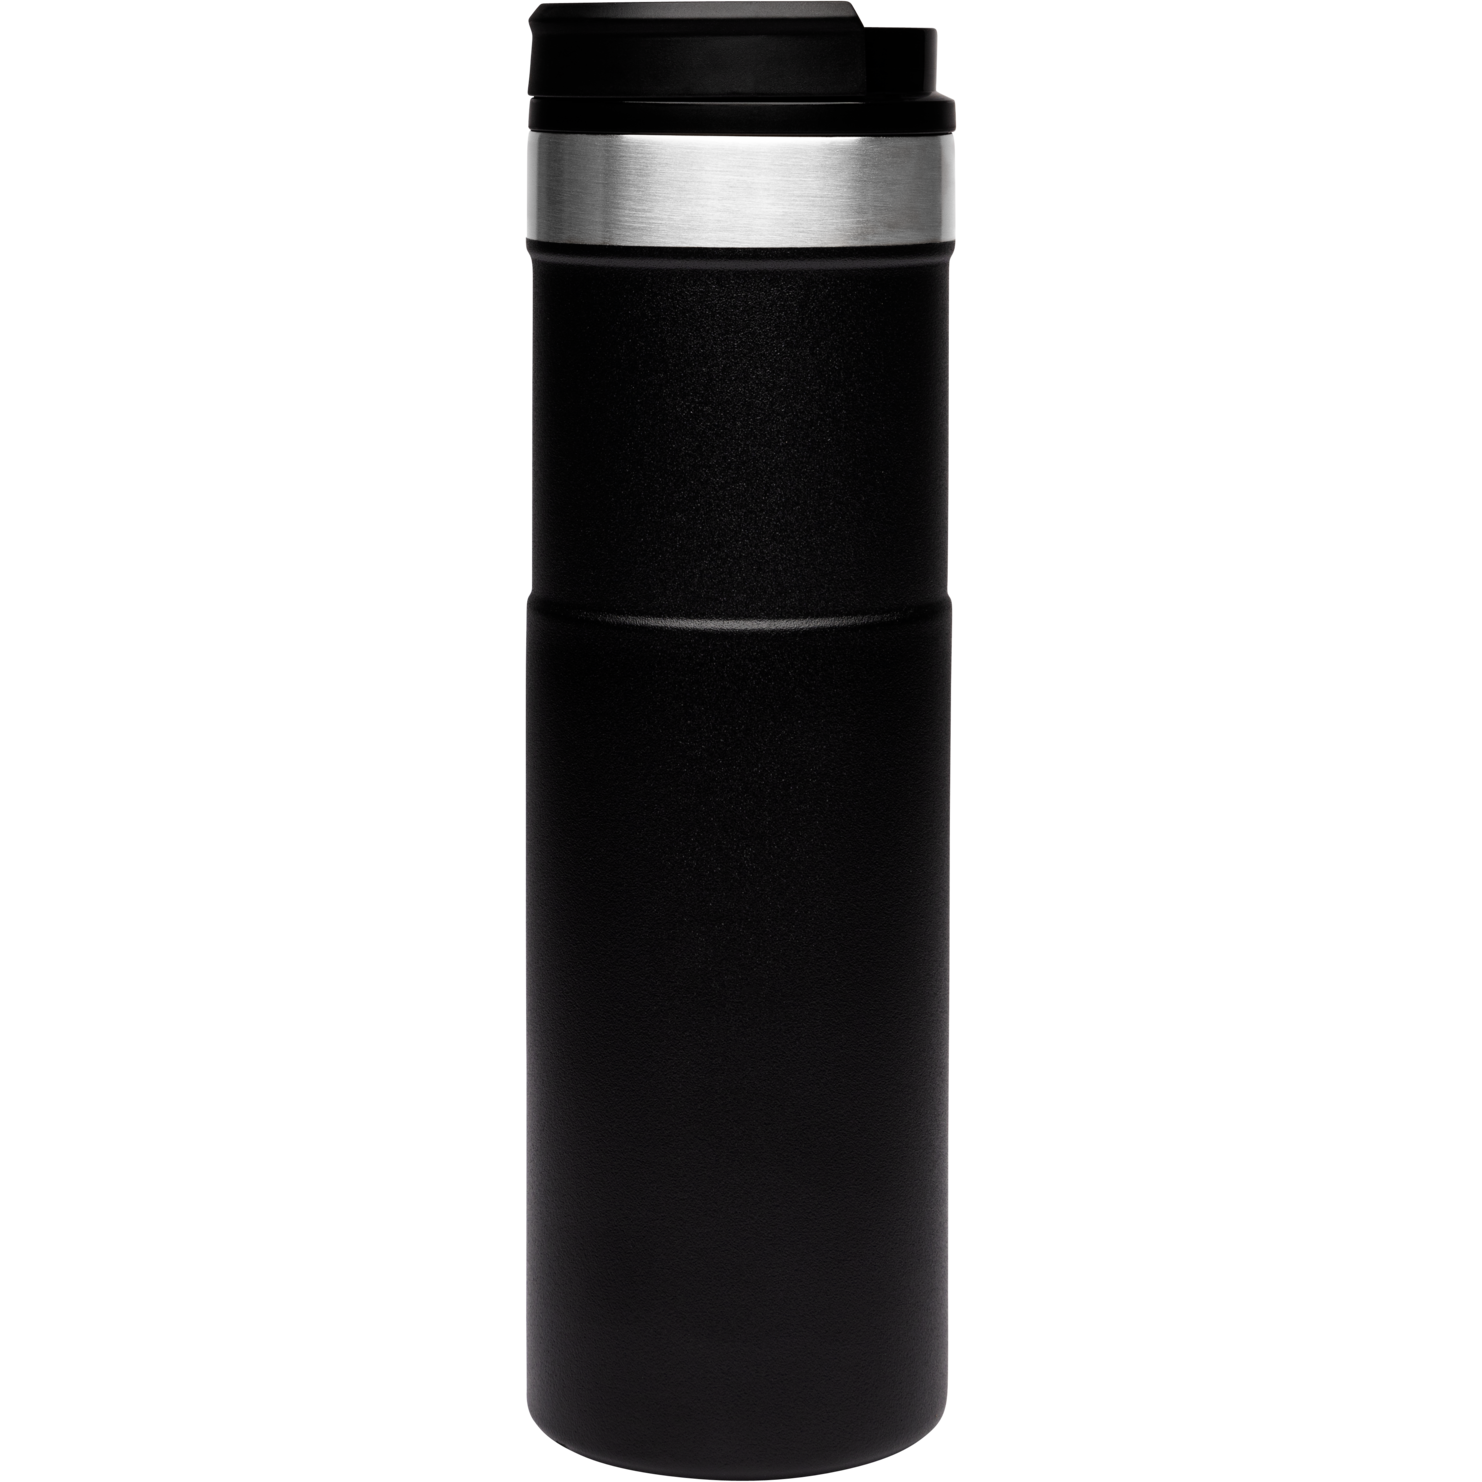 Buy Stanley Neverleak thermos bottles? Tested and in stock!